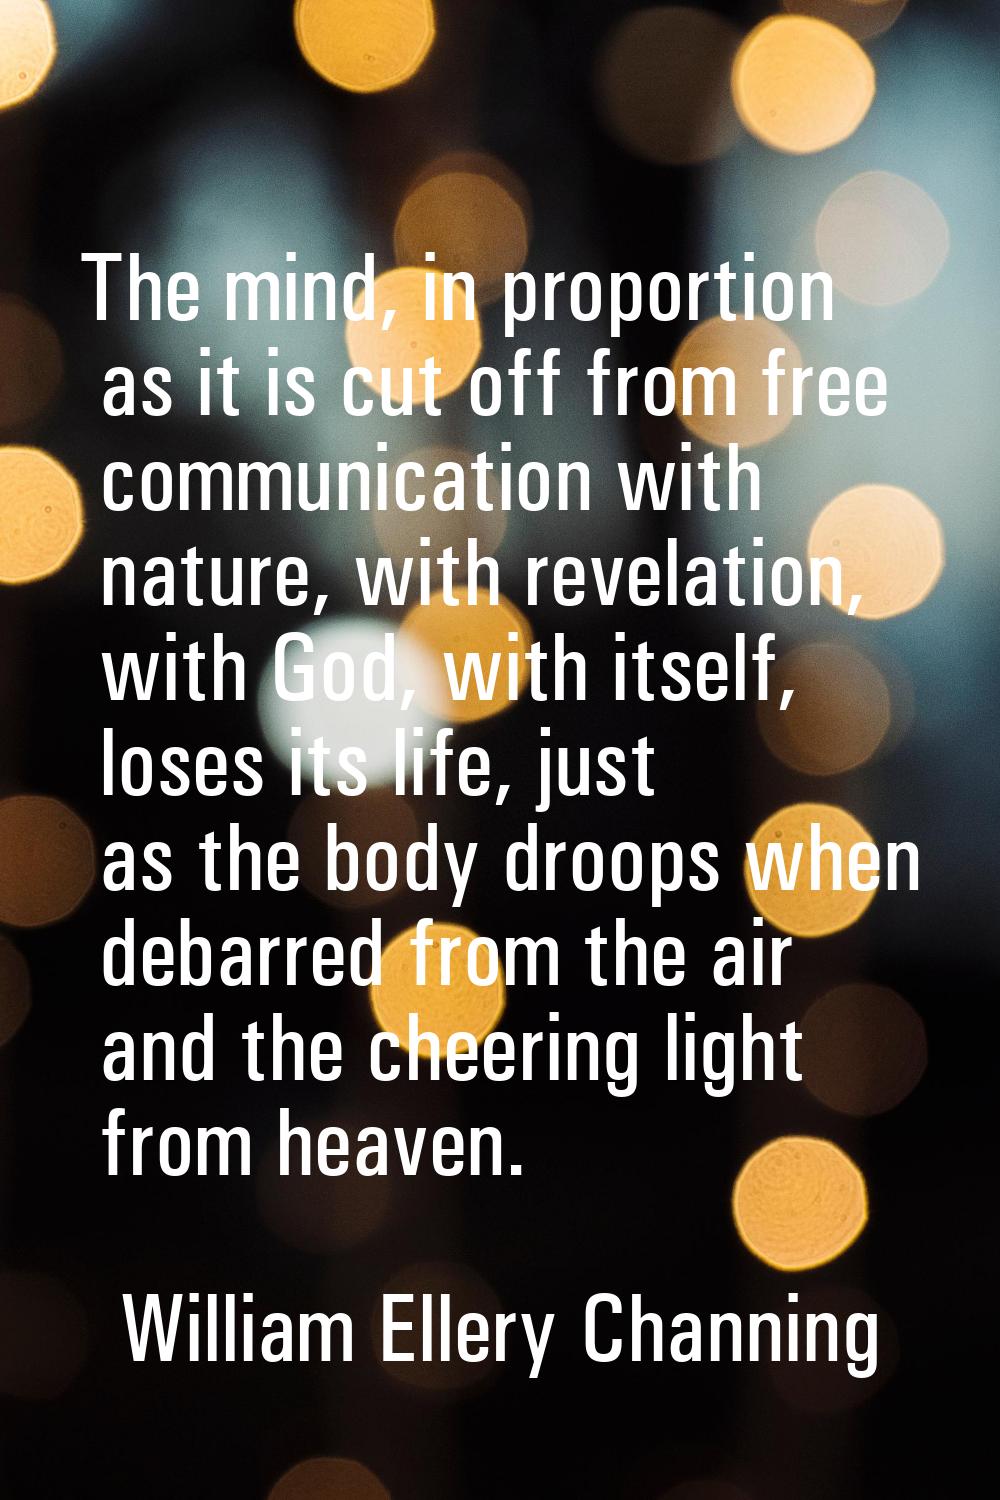 The mind, in proportion as it is cut off from free communication with nature, with revelation, with